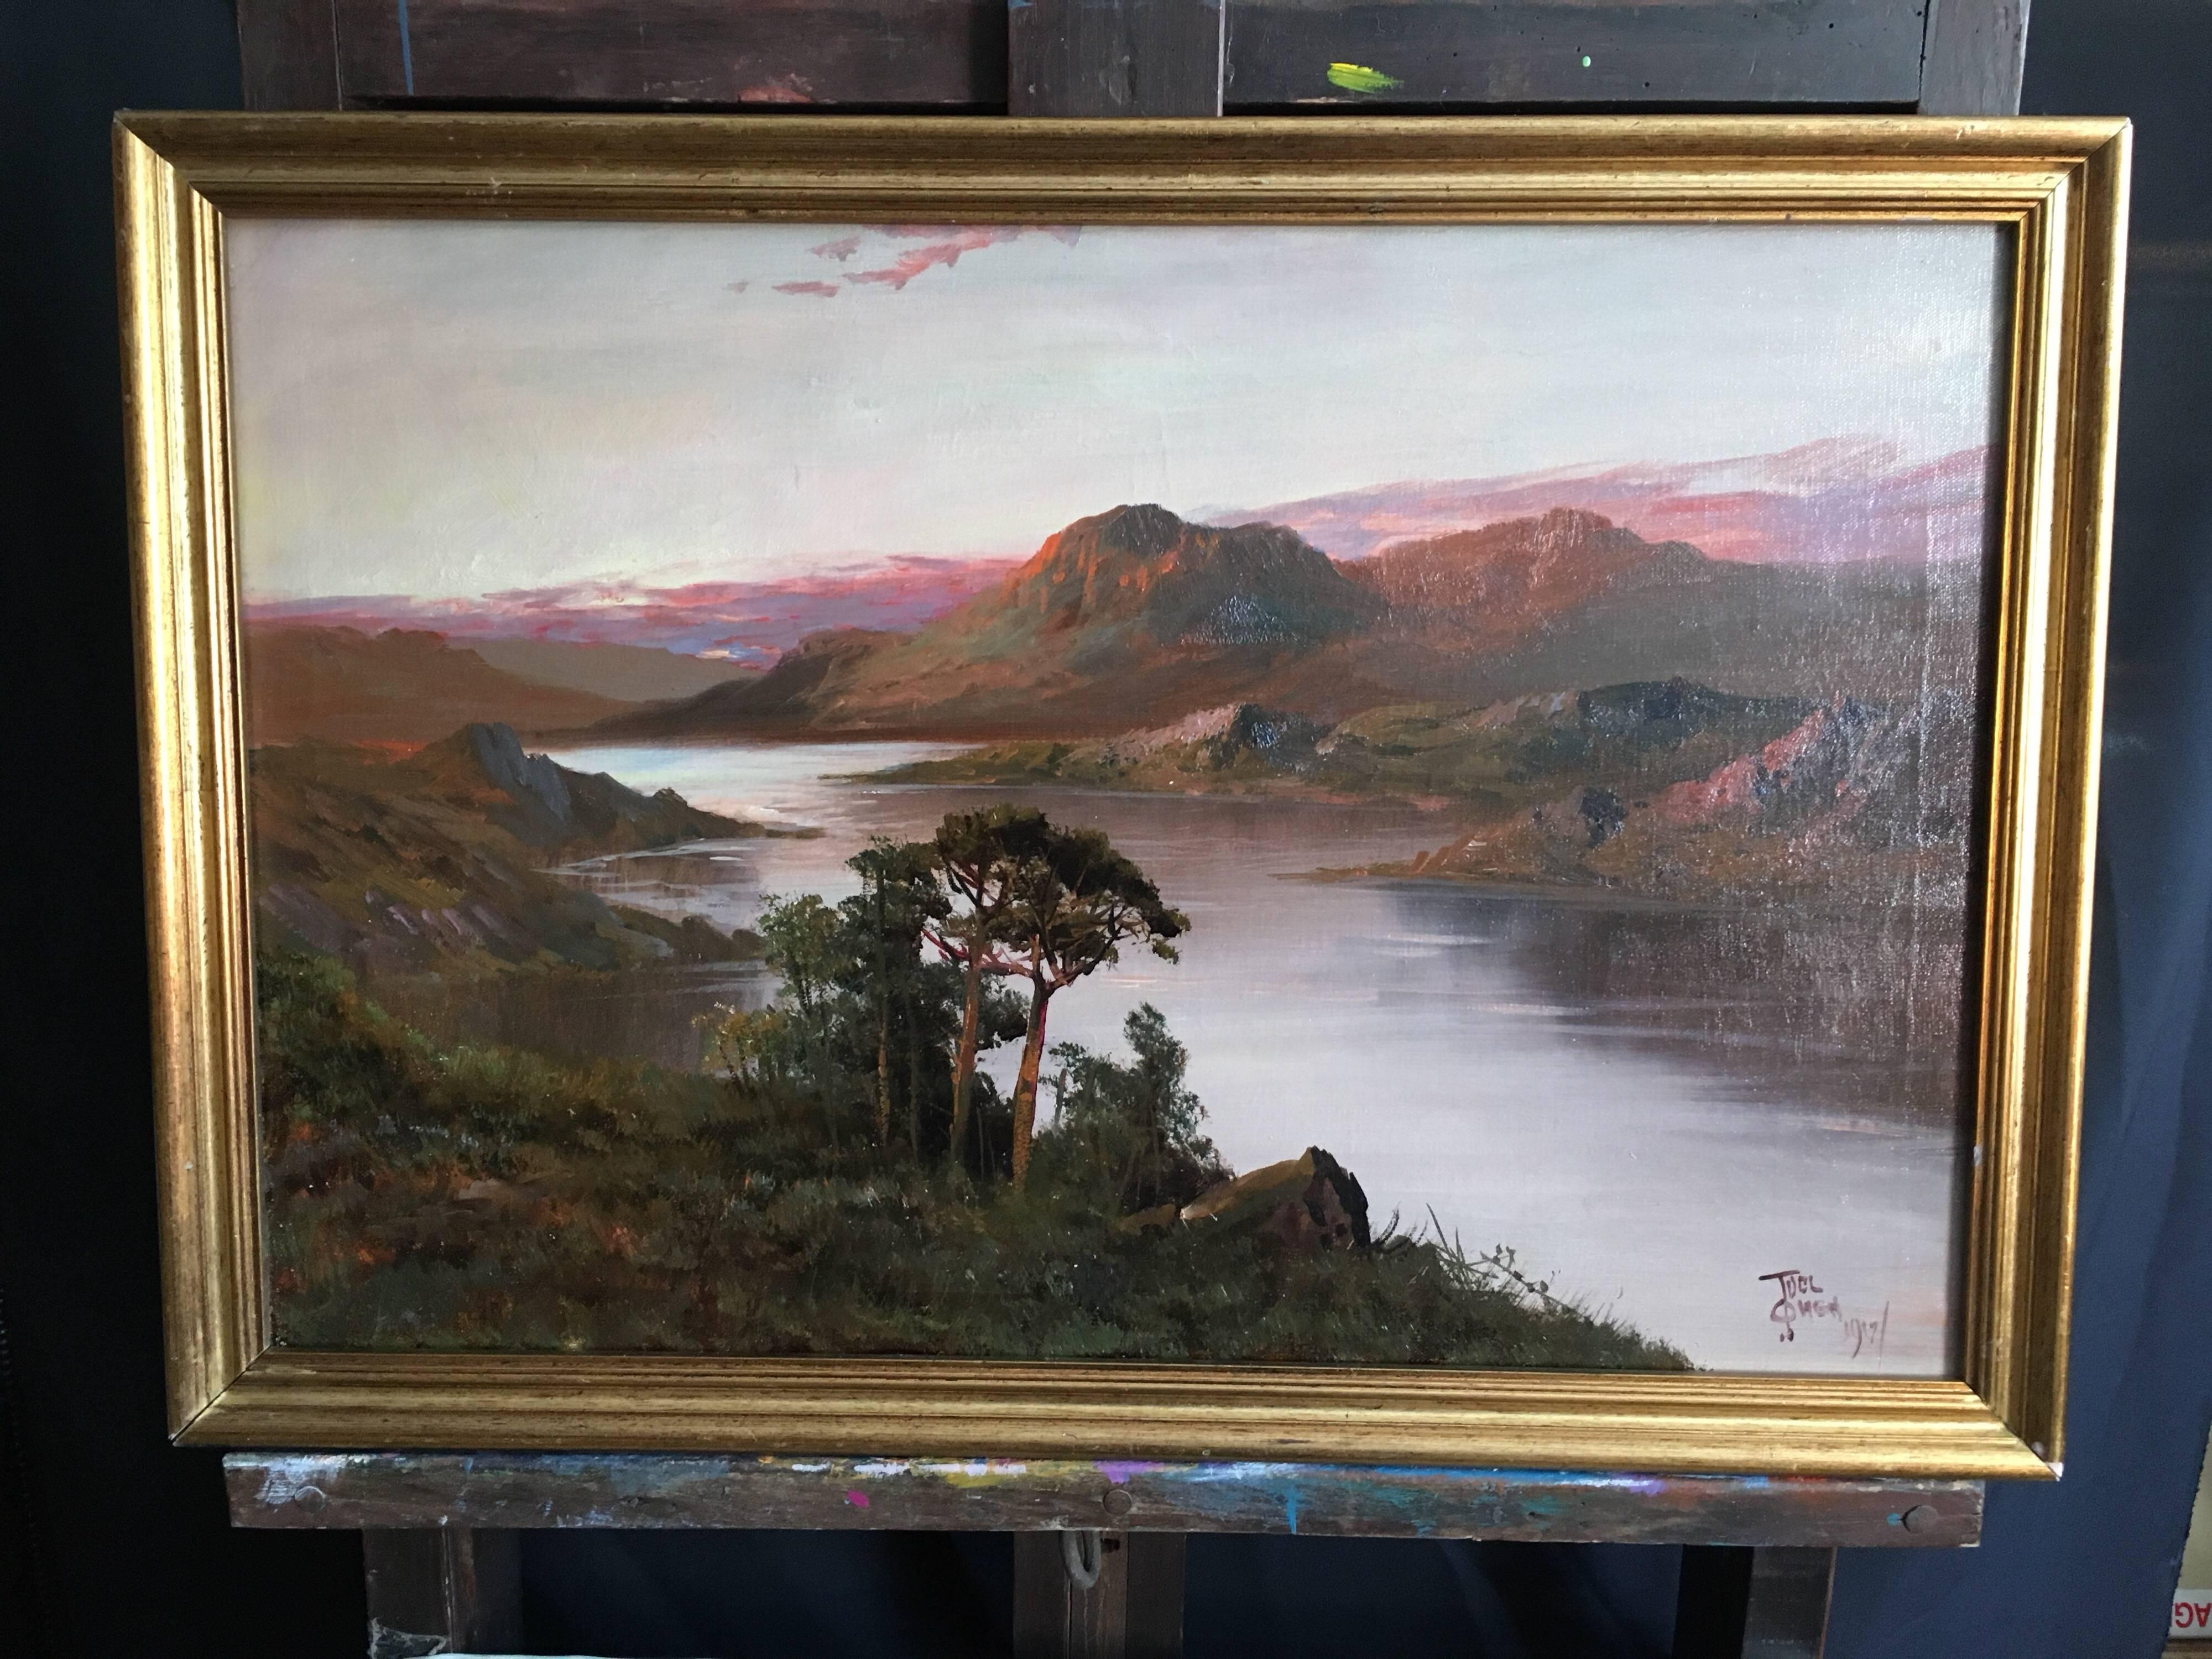 Antique Large Landscape of Scotland, Sunset, Signed
by F. E. Jamieson (British 1895-1950)
signed, lower corner, using his pseudonym 'Joel Owen'
Dated '1919'
oil painting on canvas laid over board, framed
framed: 26 x 18 inches

Fine quality antique